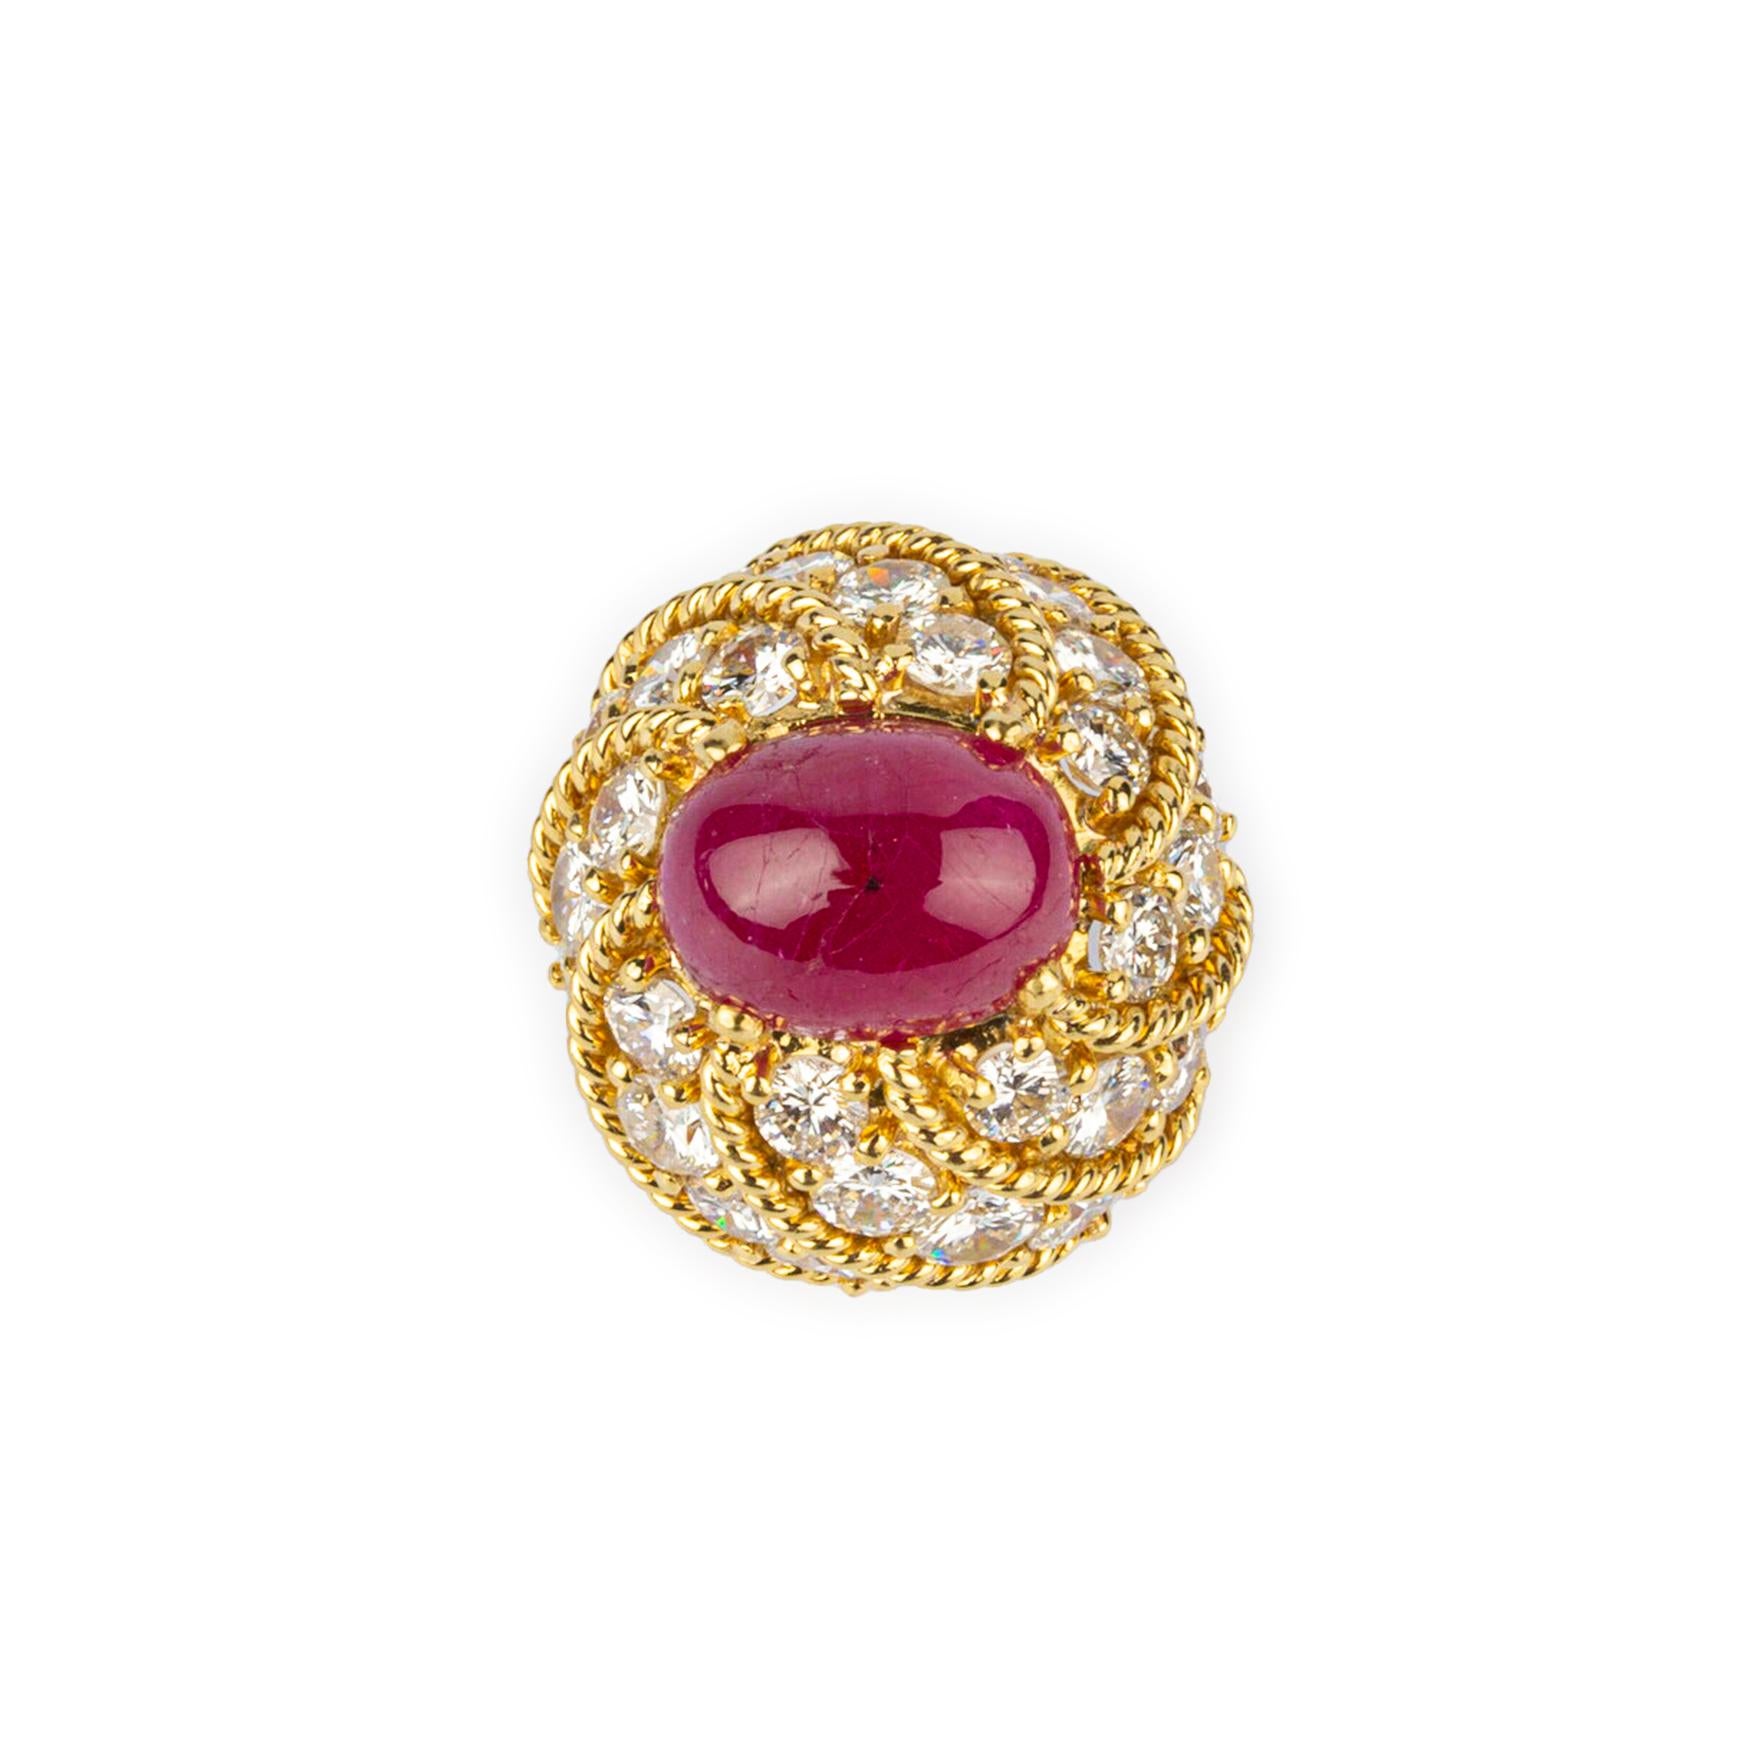 A Beautiful Cabochon Ruby & Diamond Cocktail Ring in 18k Yellow Gold. Made in the USA, circa 1970. 
Mounted with 30 Round Diamonds Weighing 6.50 cts
E-F Color VVS-VS Clarity
Ruby Weighs 5.00 cts